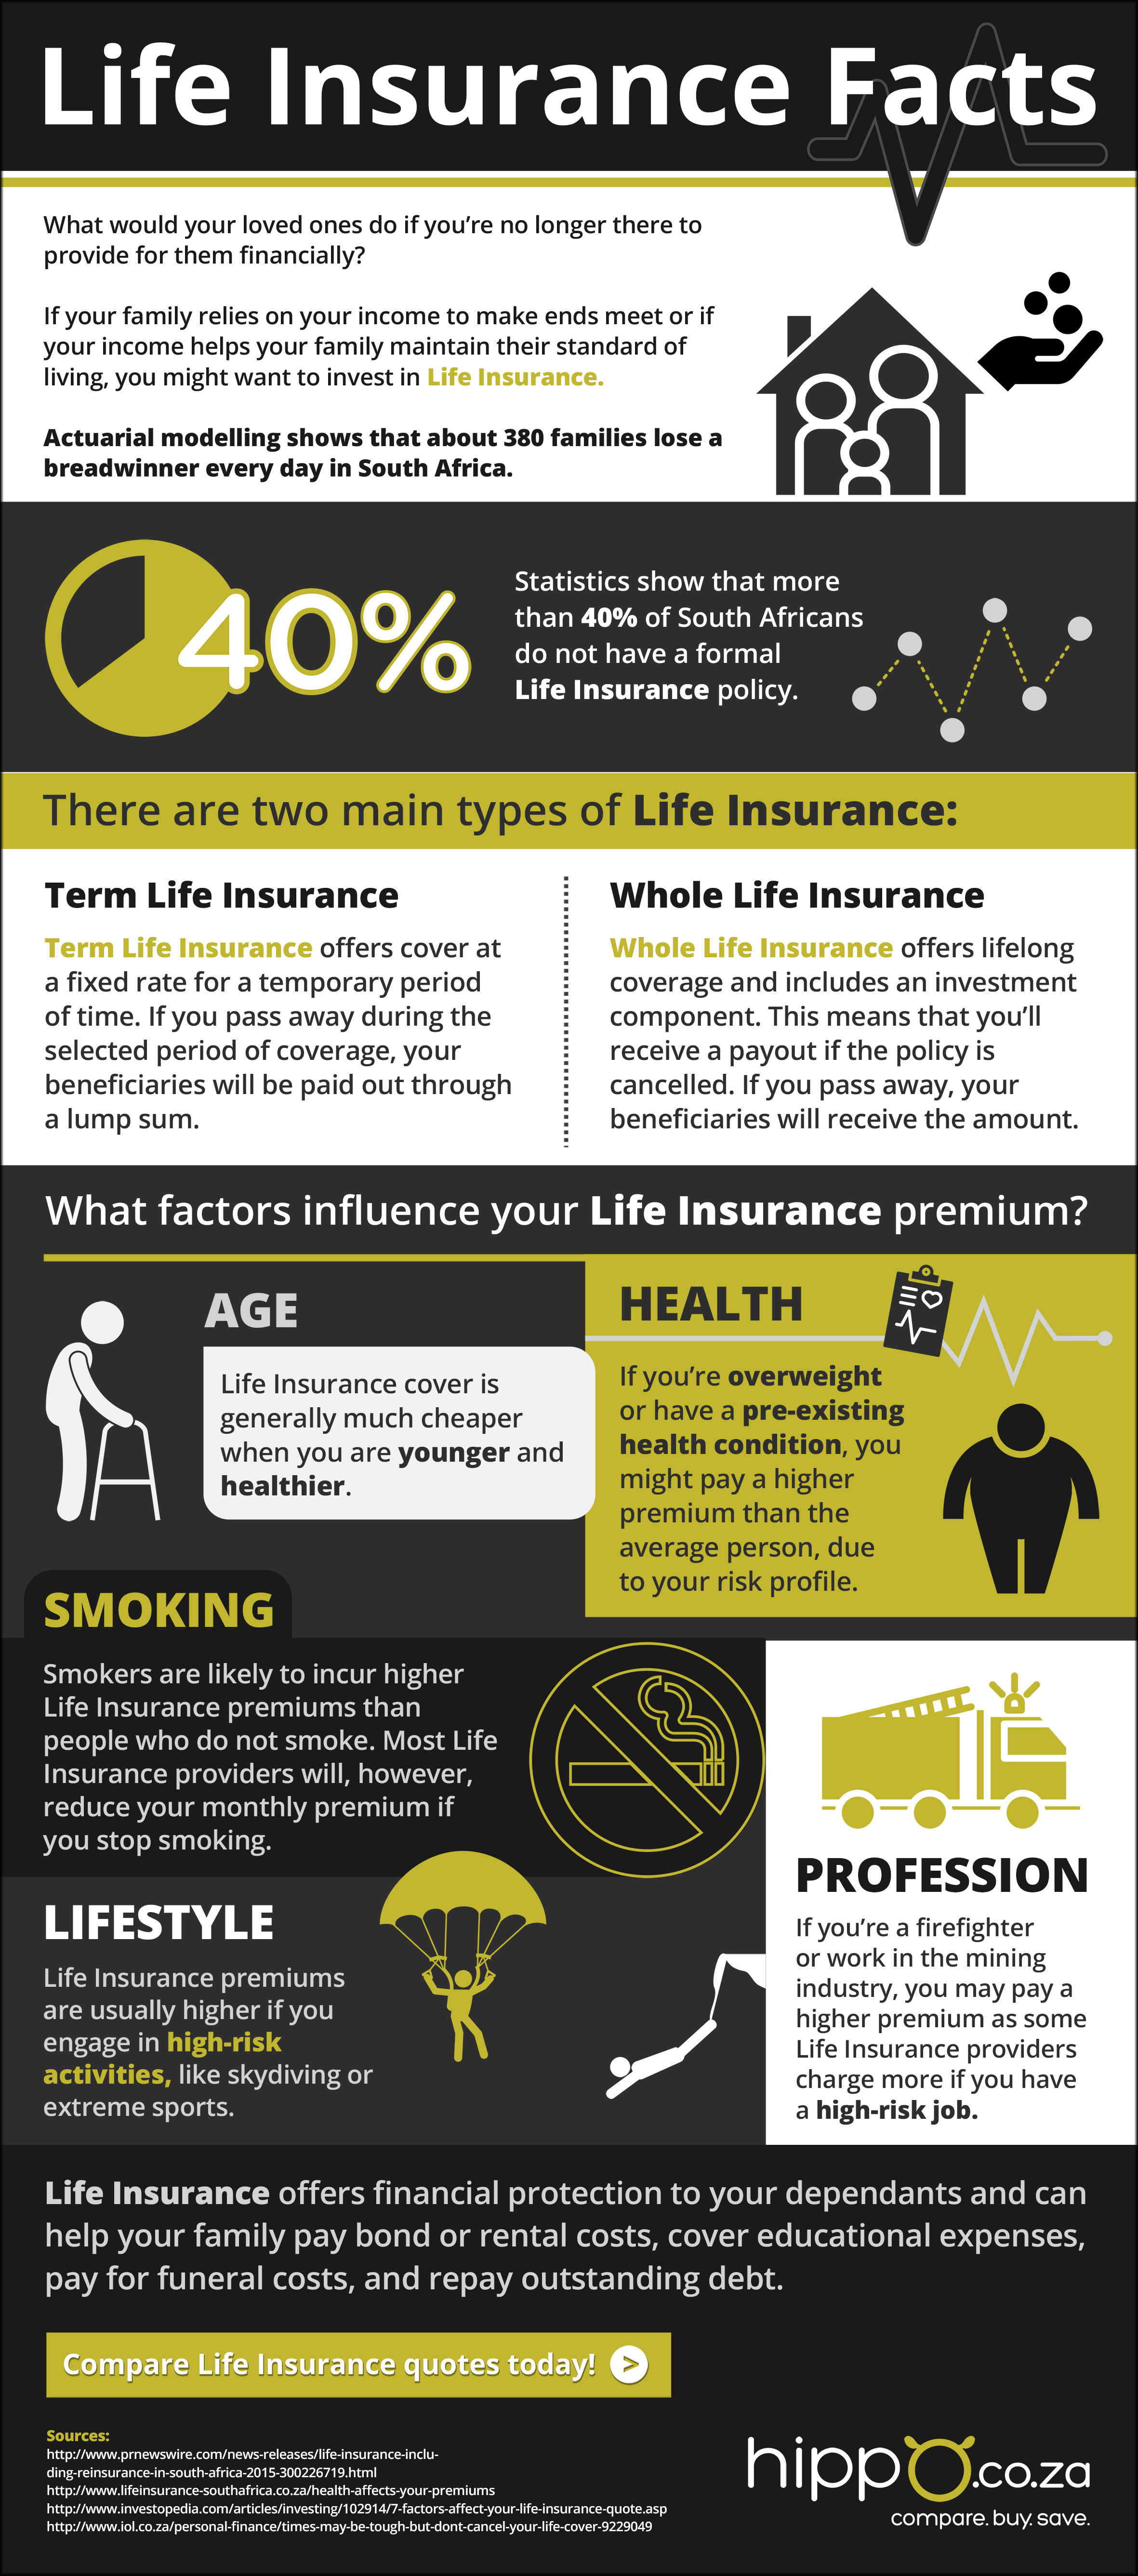 Why do You Need Life Insurance